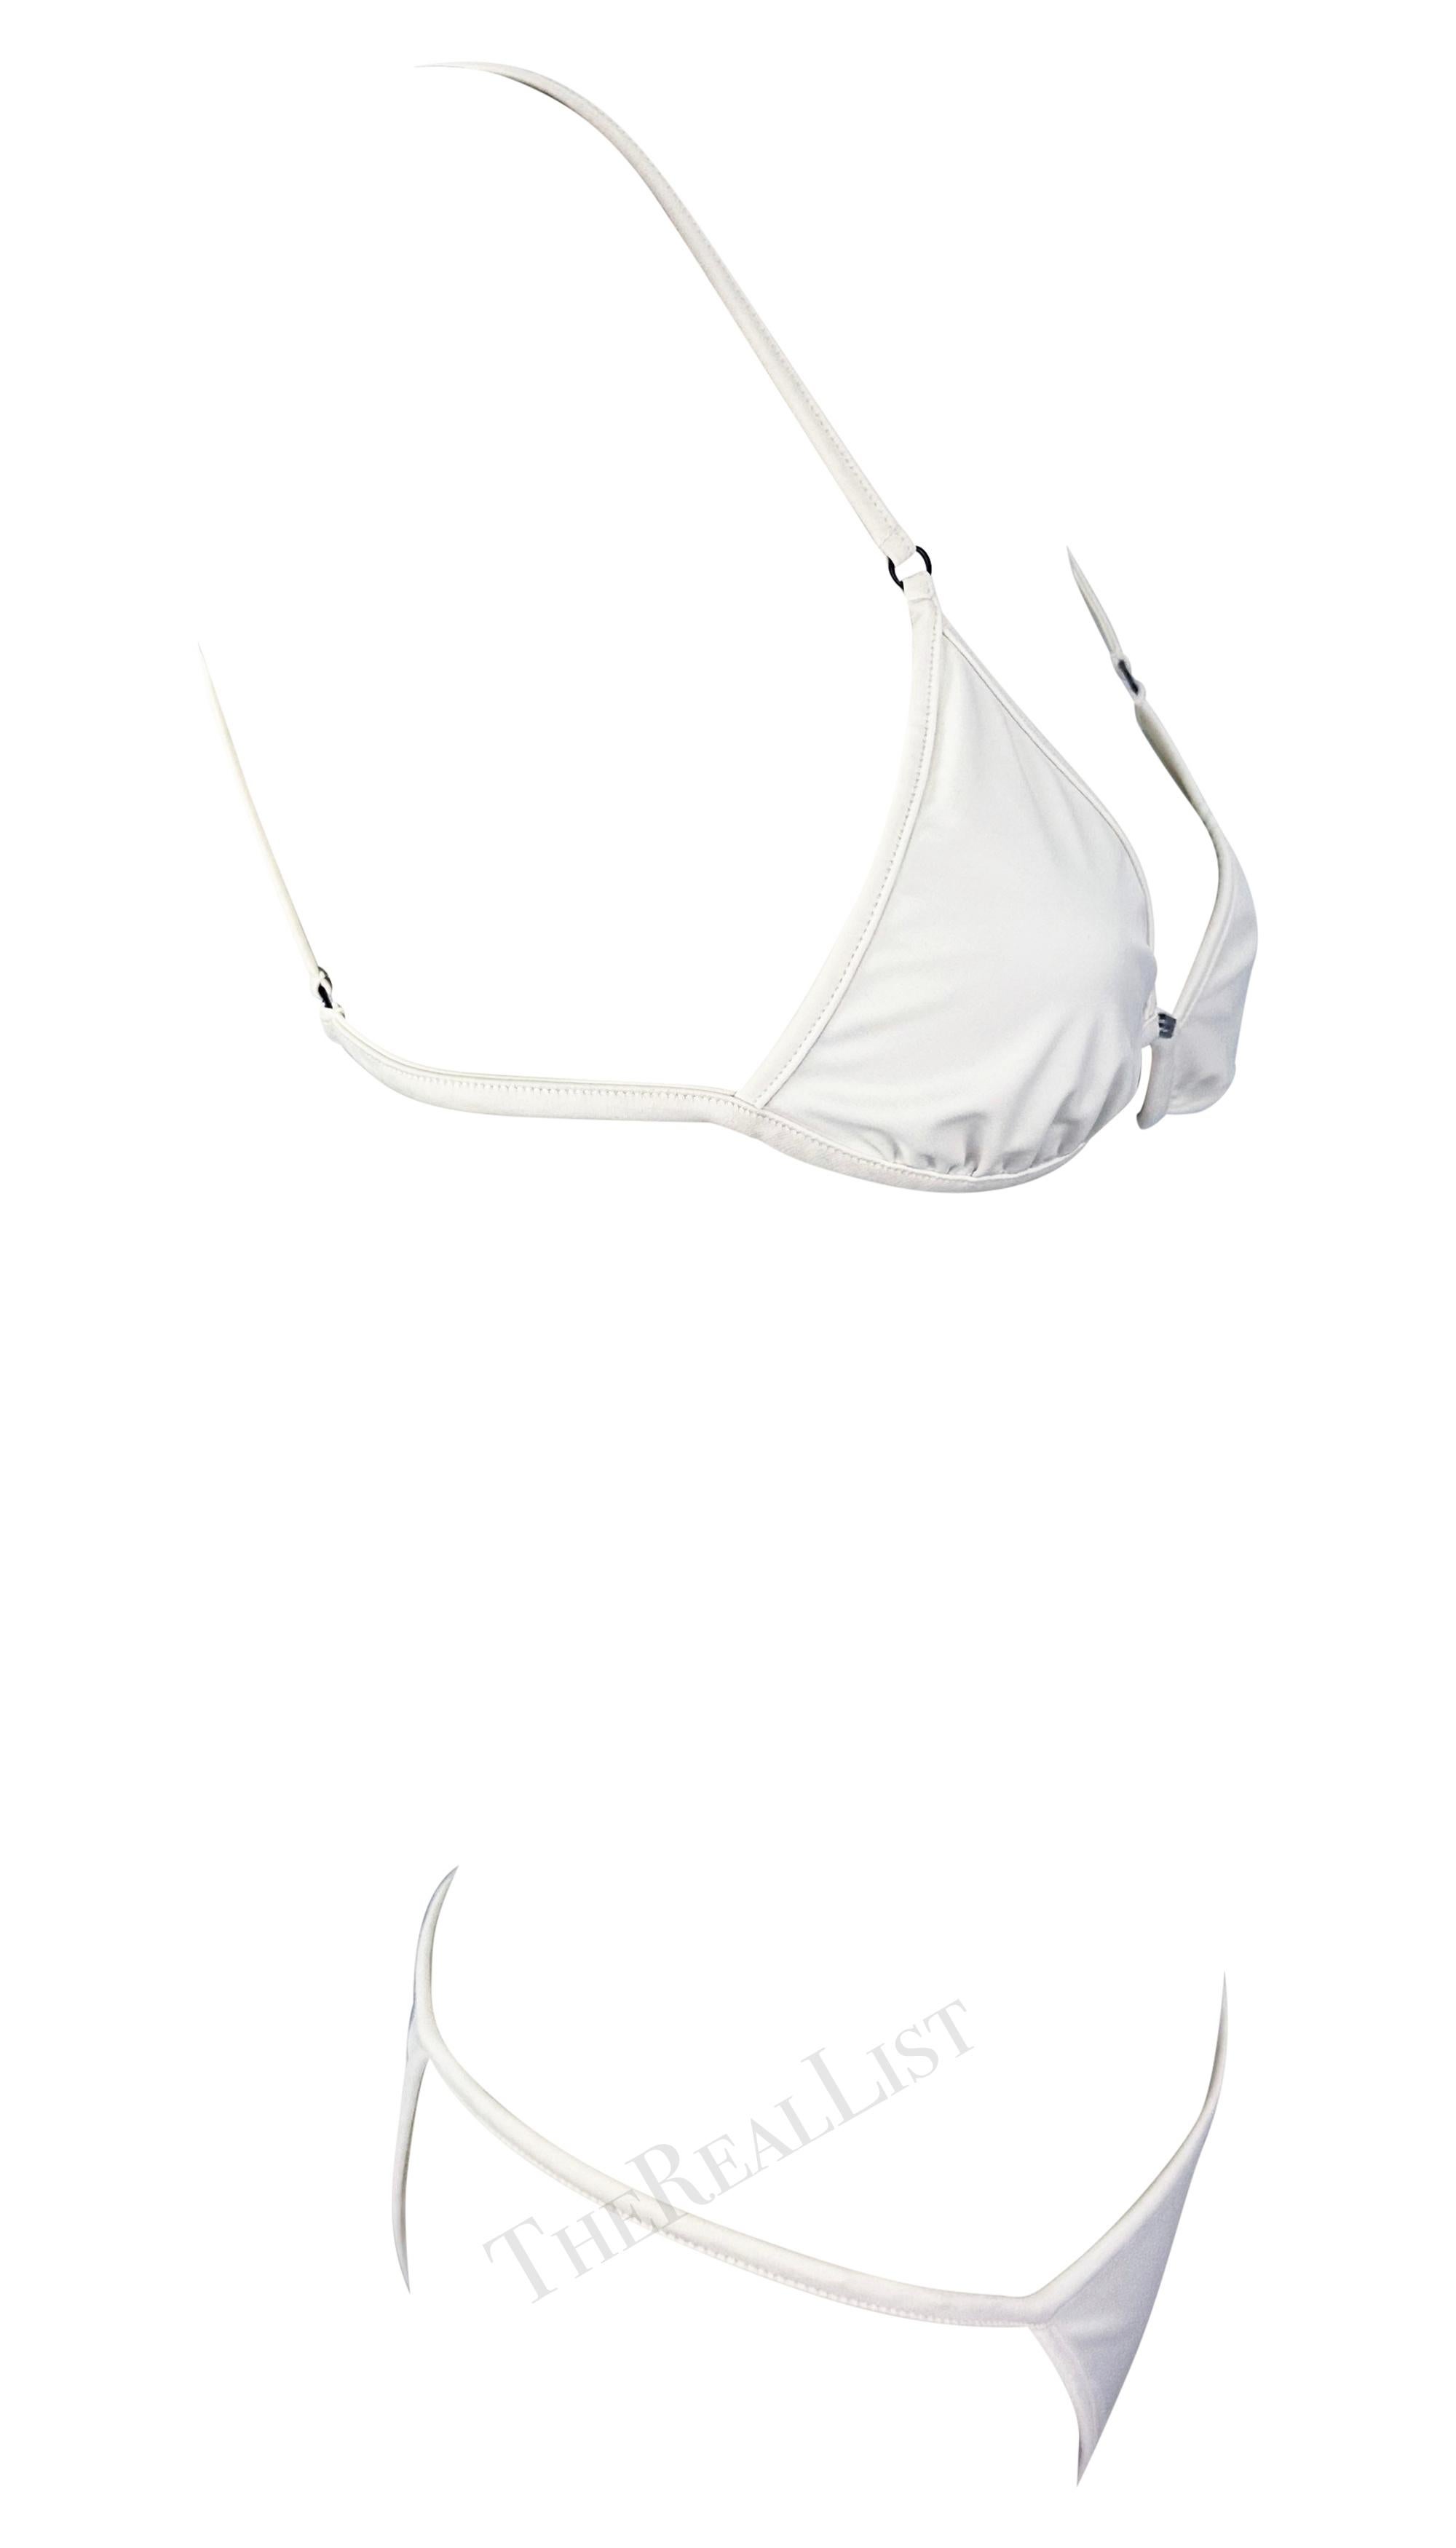 S/S 2001 Gucci by Tom Ford White Bikini Two-Piece Swimsuit Set For Sale 3